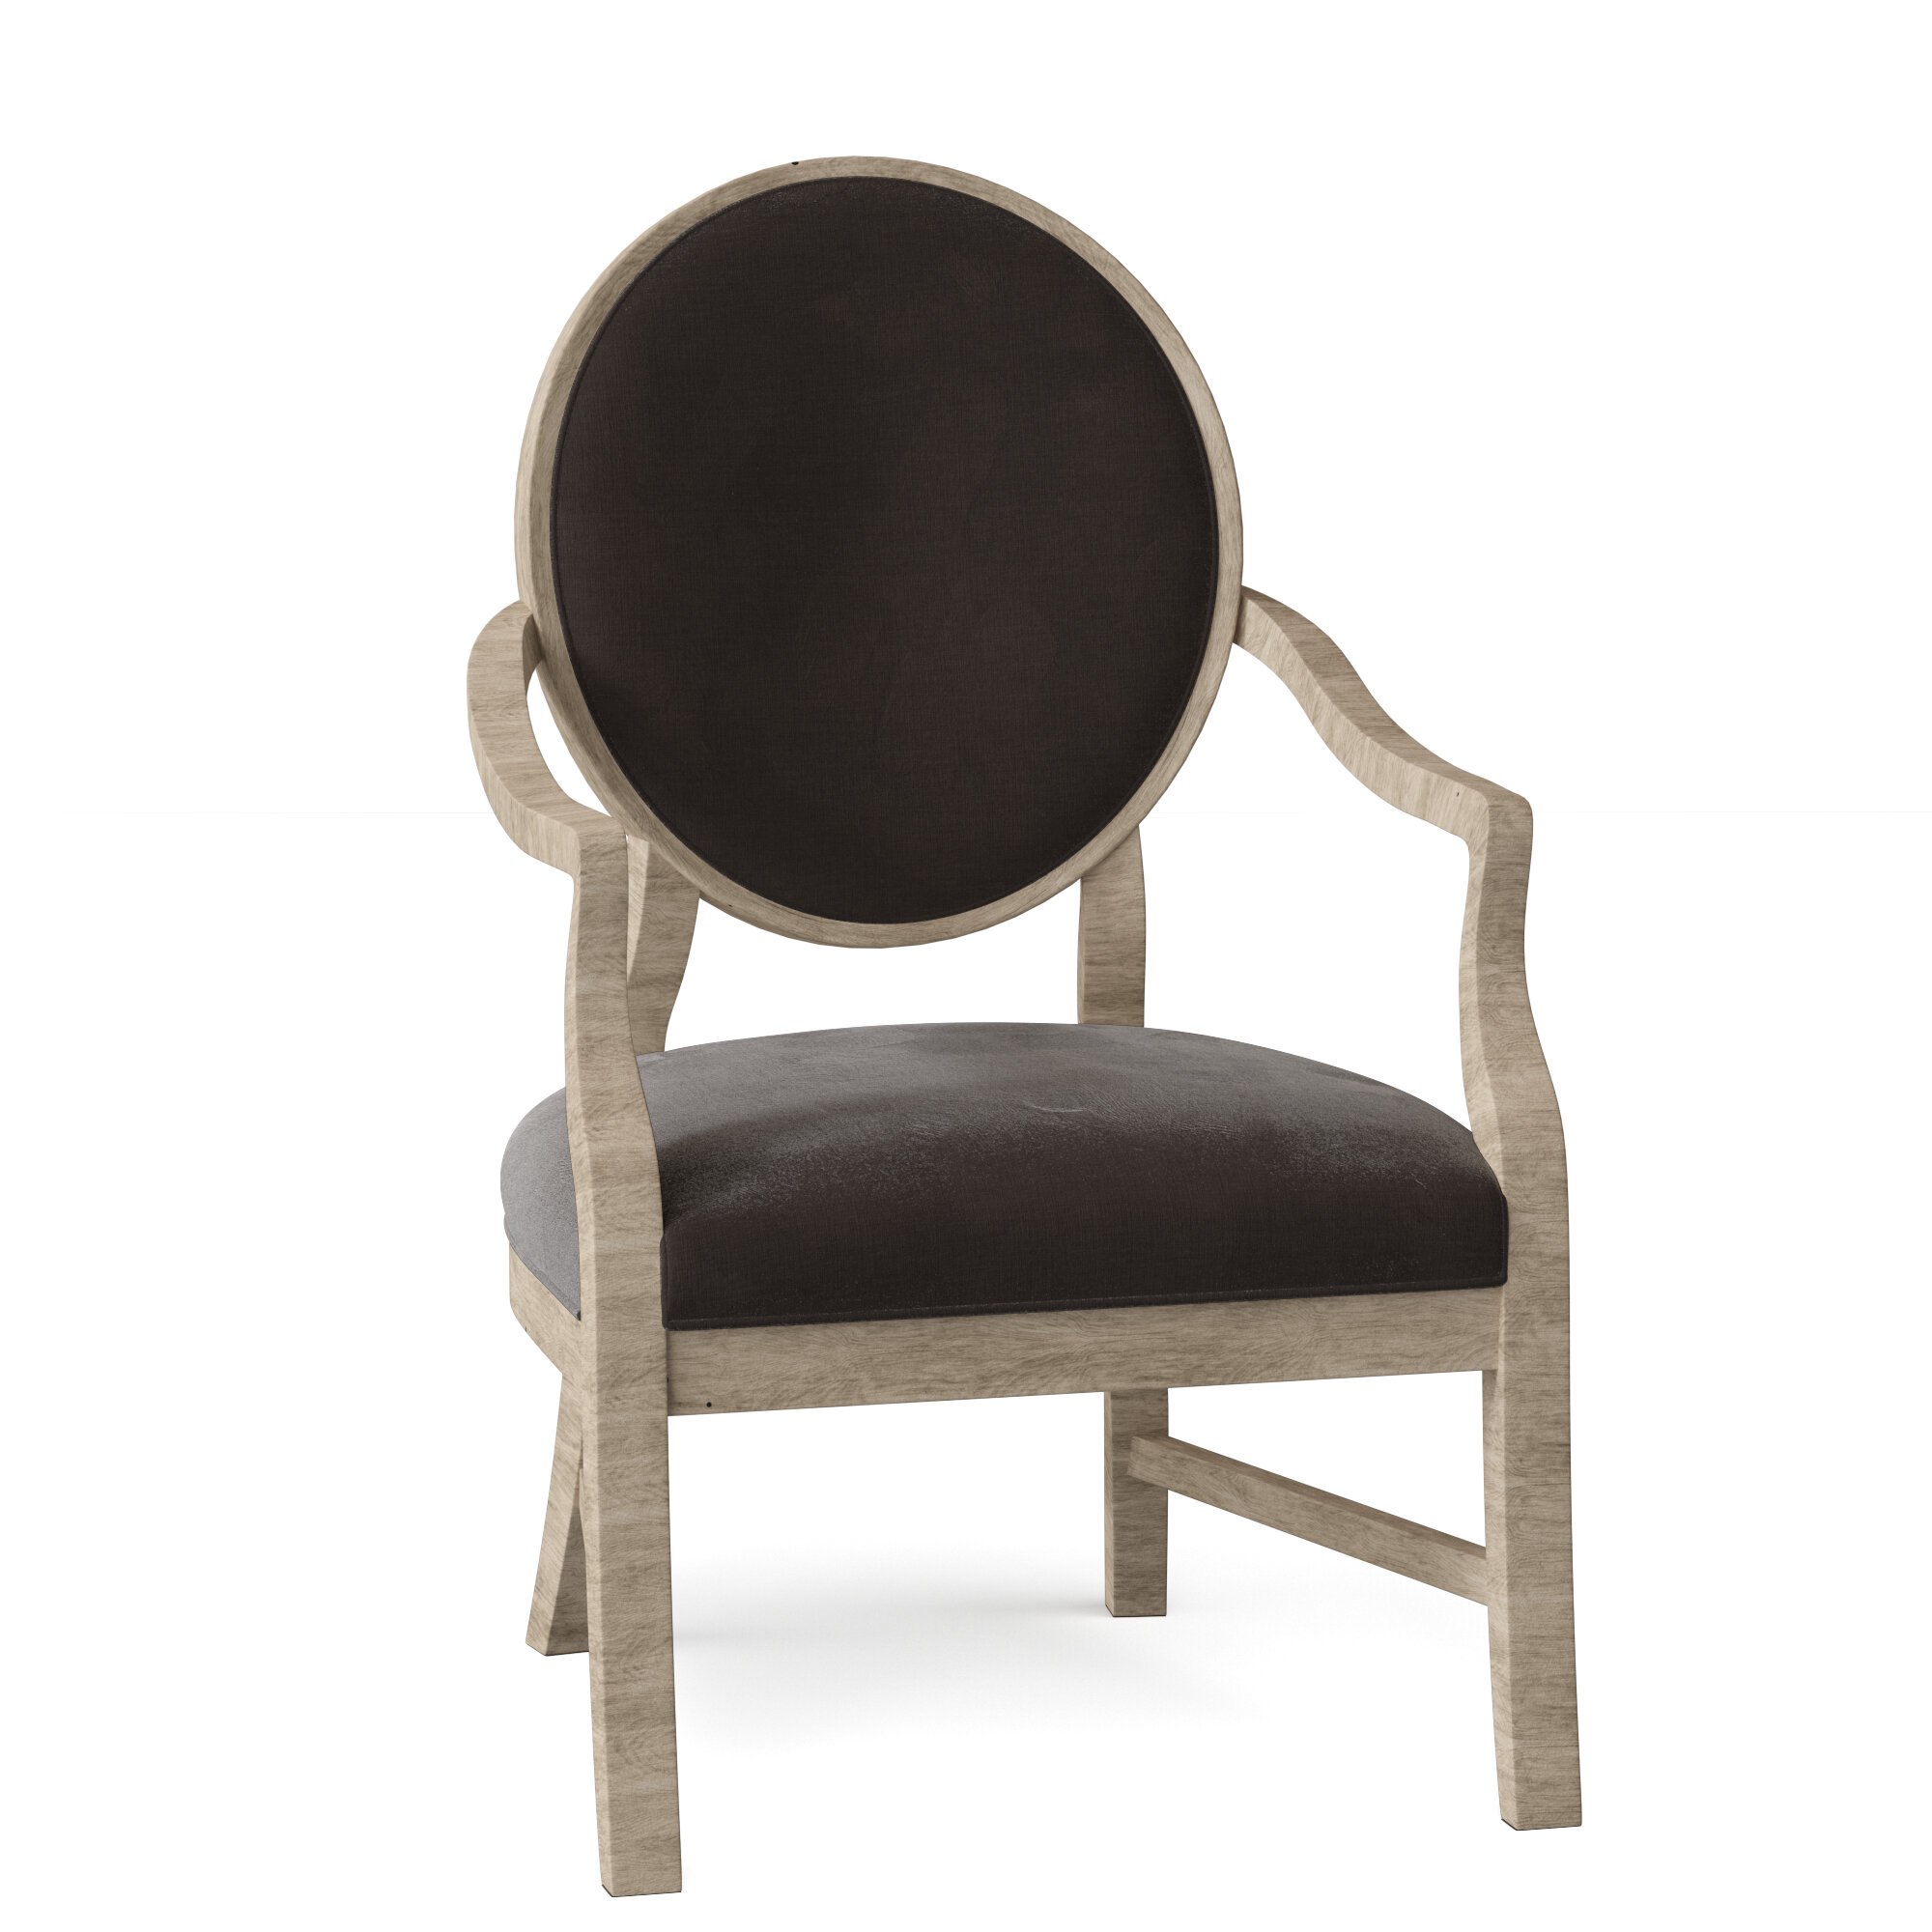 Jahim Solid Wood King Louis Back Arm Chair (Set of 2) Gracie Oaks Leg Color: Gray, Upholstery Color: Gray